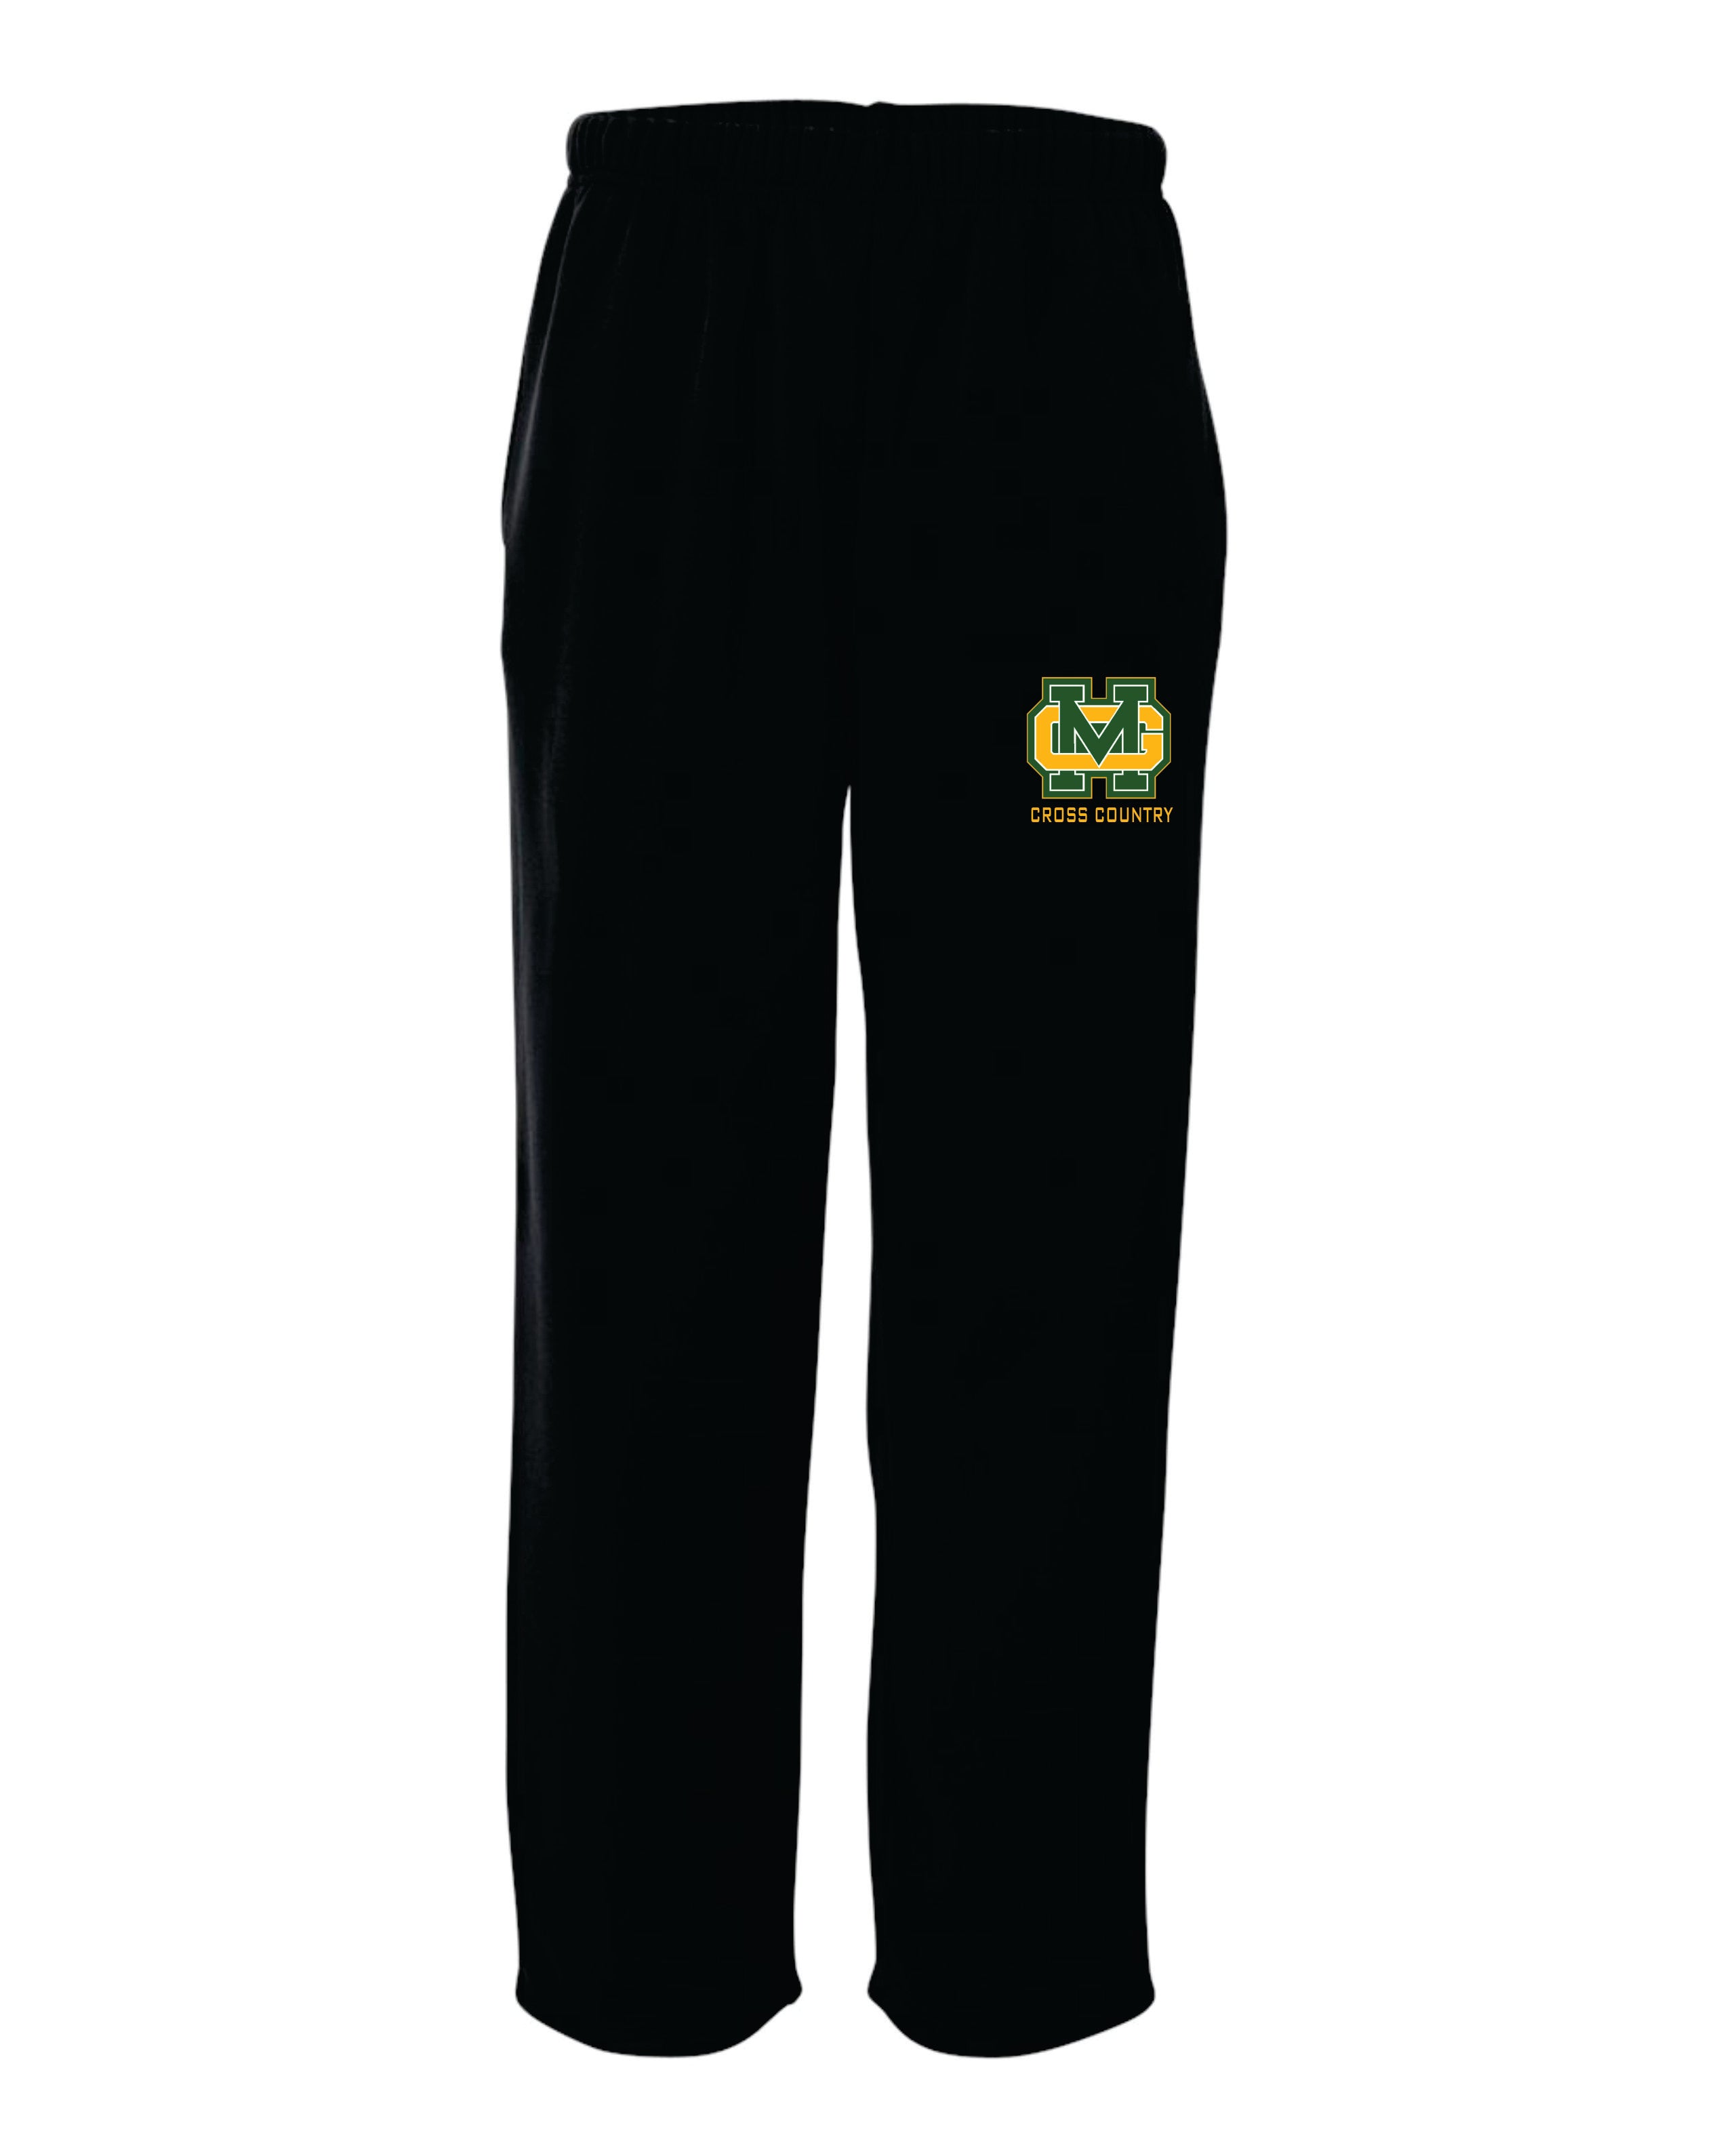 Great Mills Cross Country Badger Dri Fit Open Bottom Pants